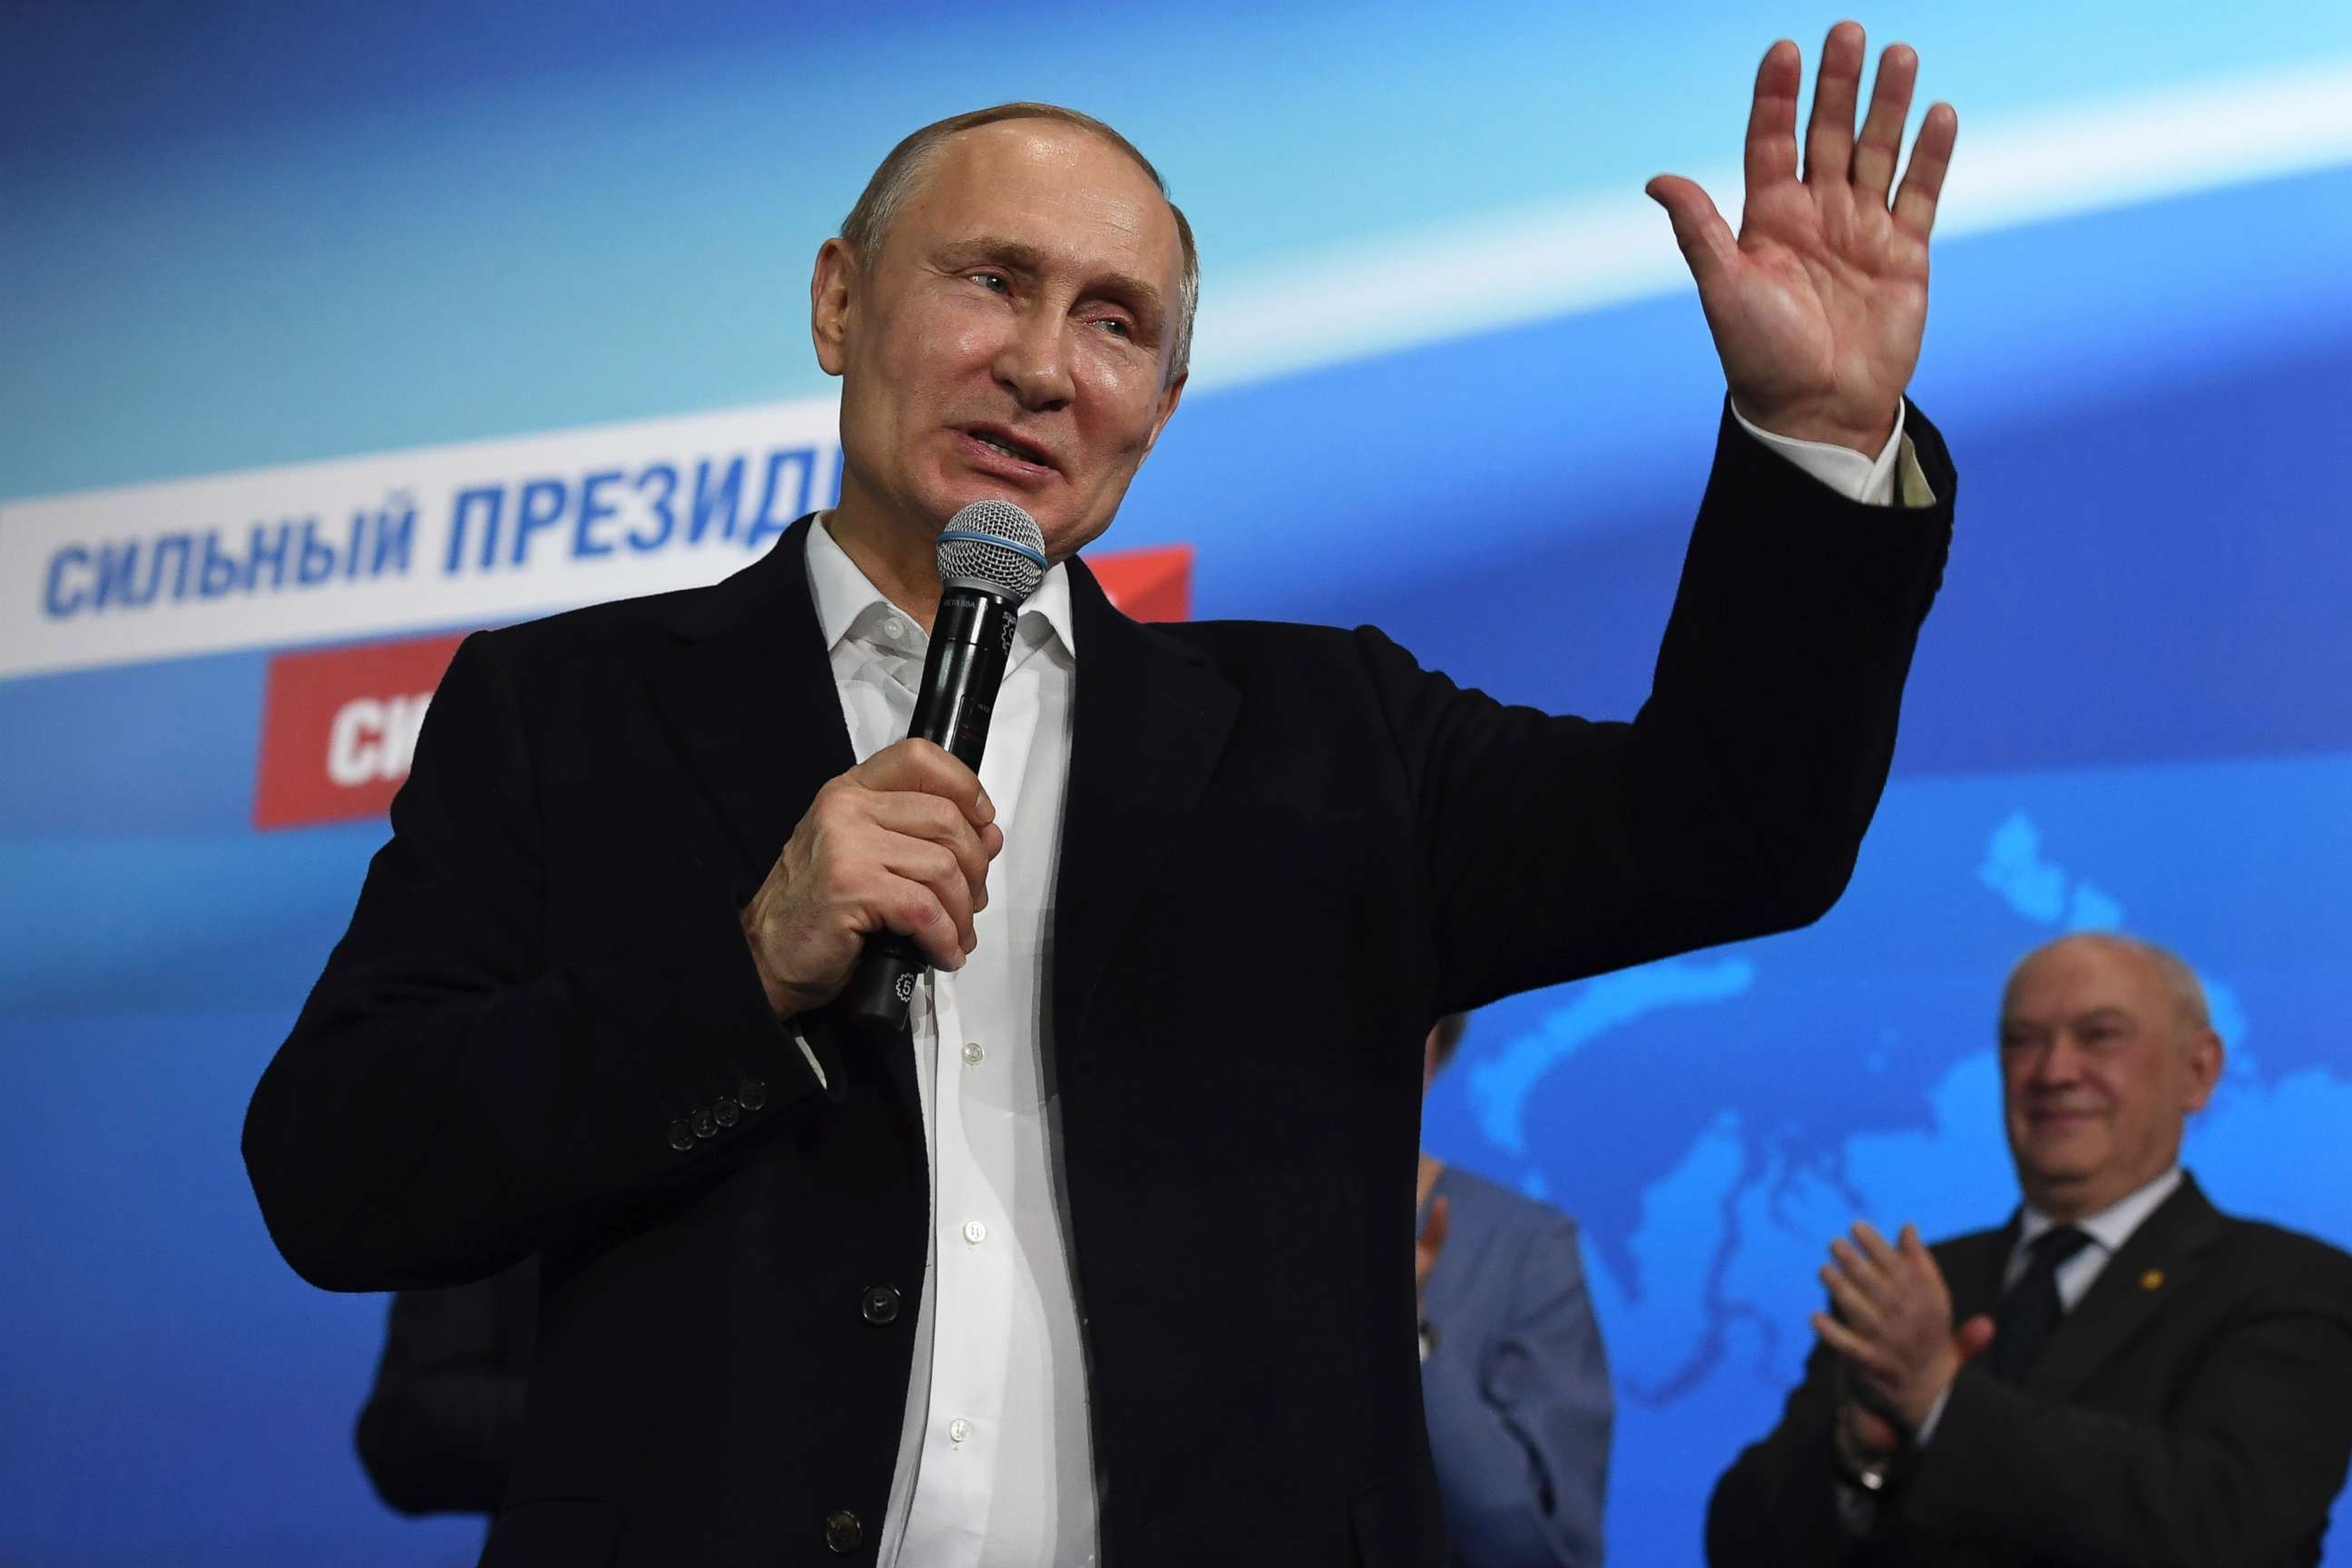 PHOTO: Russian President and Presidential candidate Vladimir Putin gestures as he speaks at his campaign headquarters in Moscow on March 18, 2018.